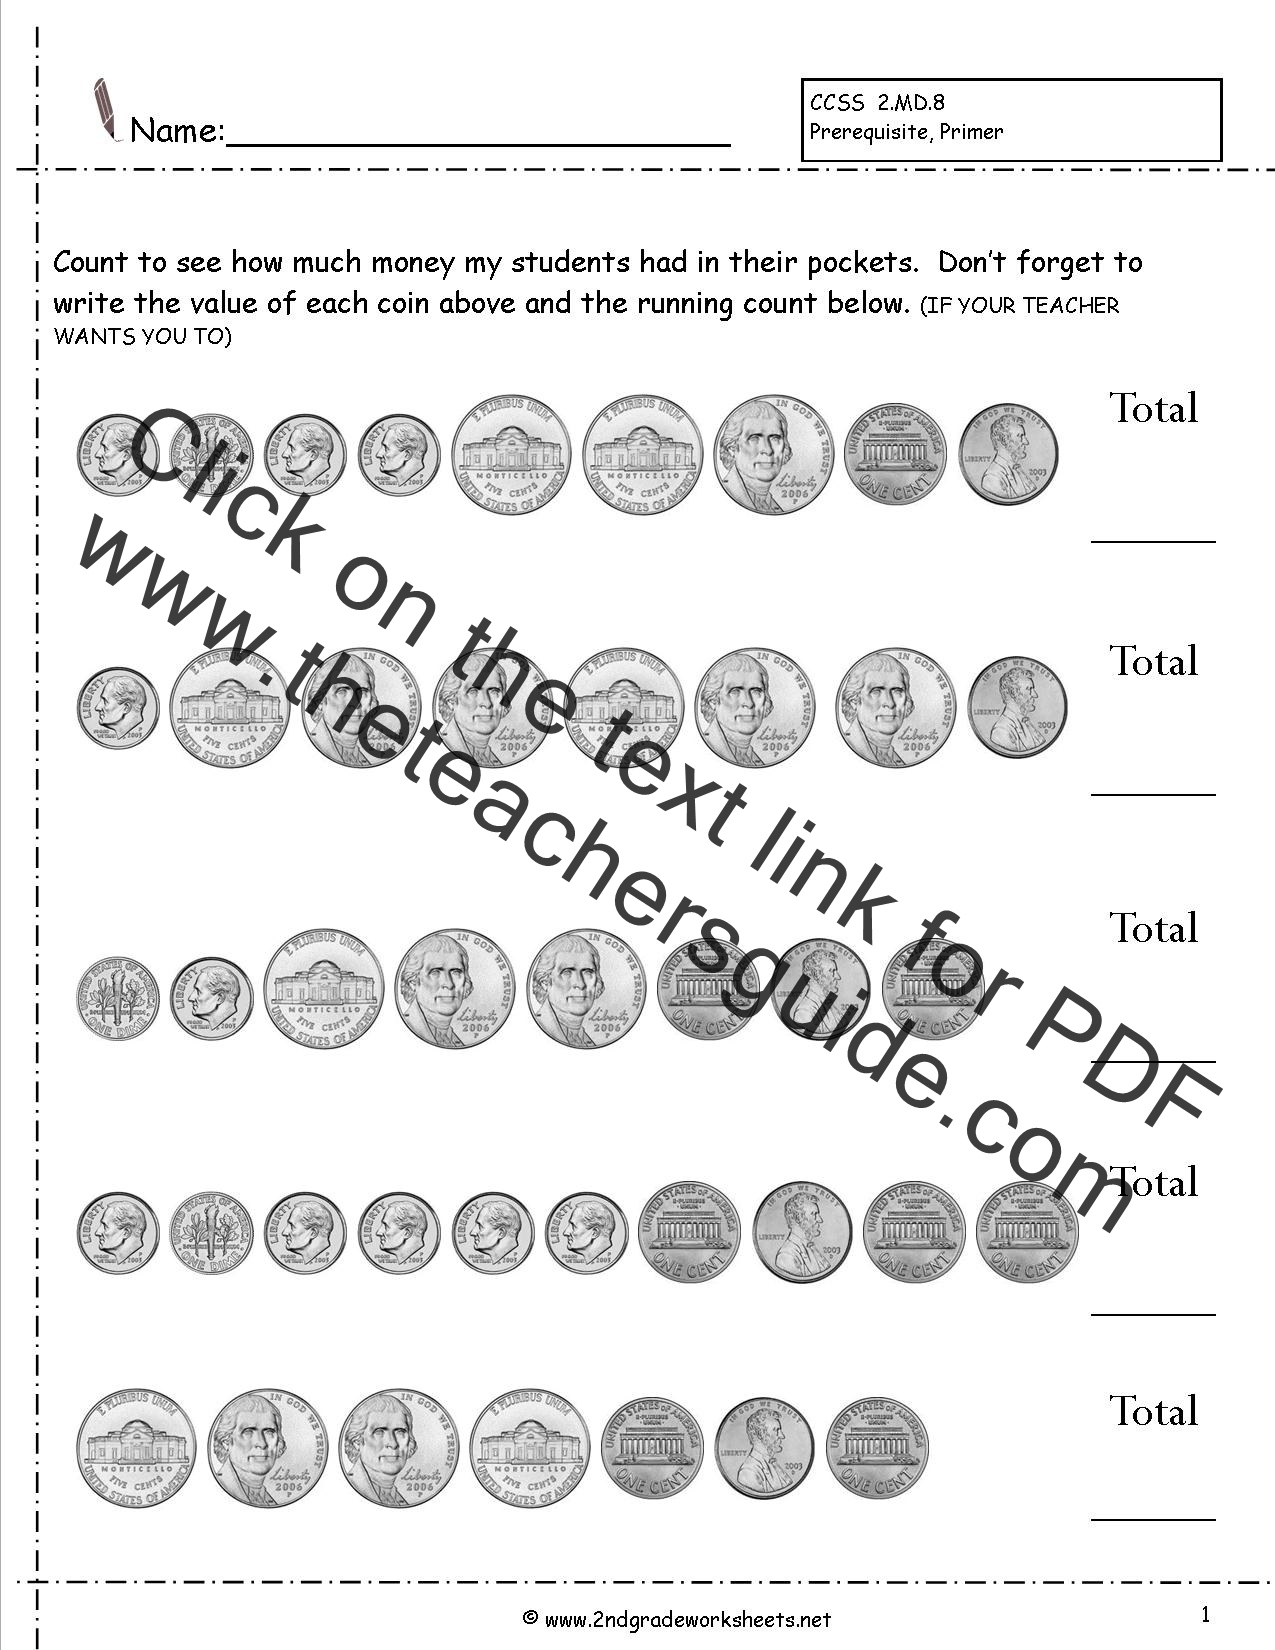 CCSS 2 MD 8 Worksheets Counting Coins Worksheets Money Wordproblems 